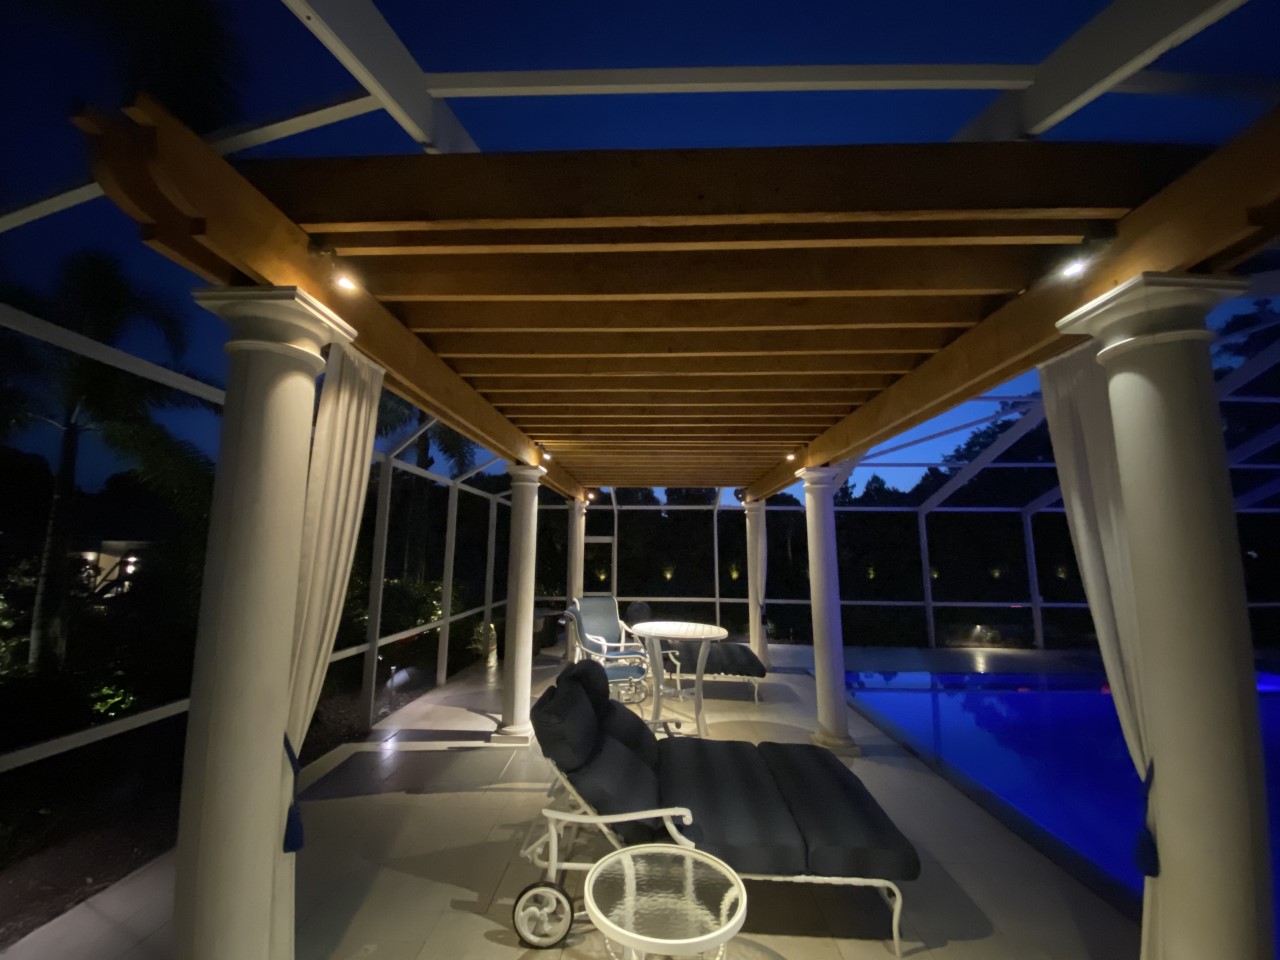 How to add outdoor pool lighting